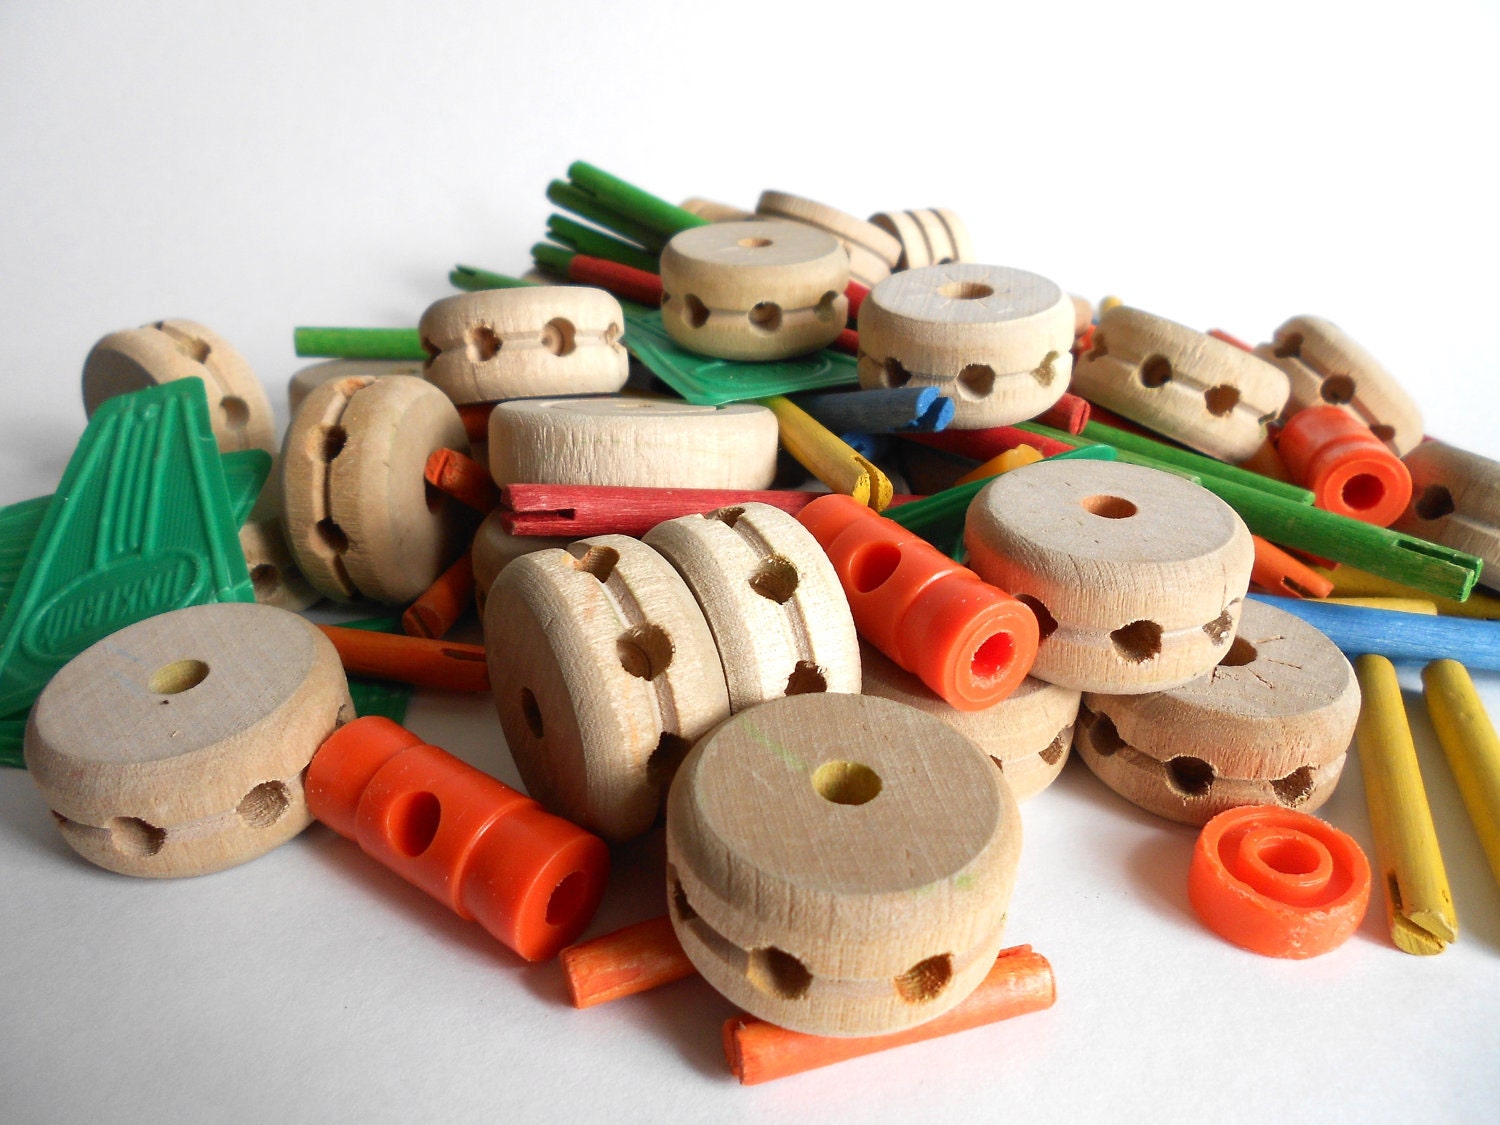 Tinker Toys Small Lot Wood Plastic by OldVintageGoodies on